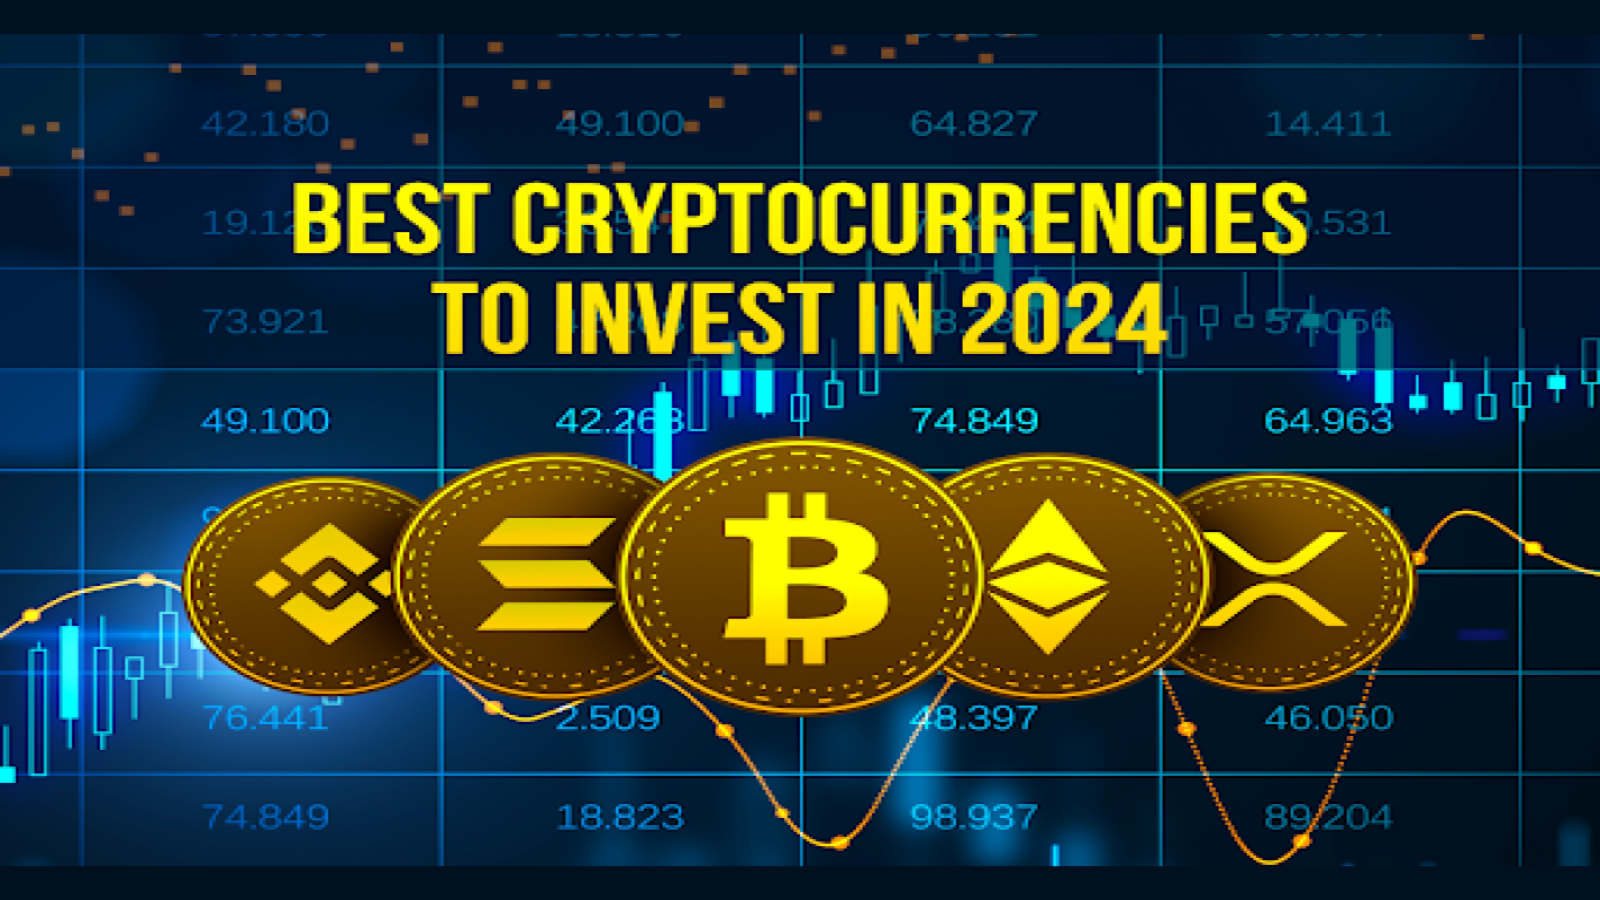 "Best Cryptocurrency to Invest in 2024"